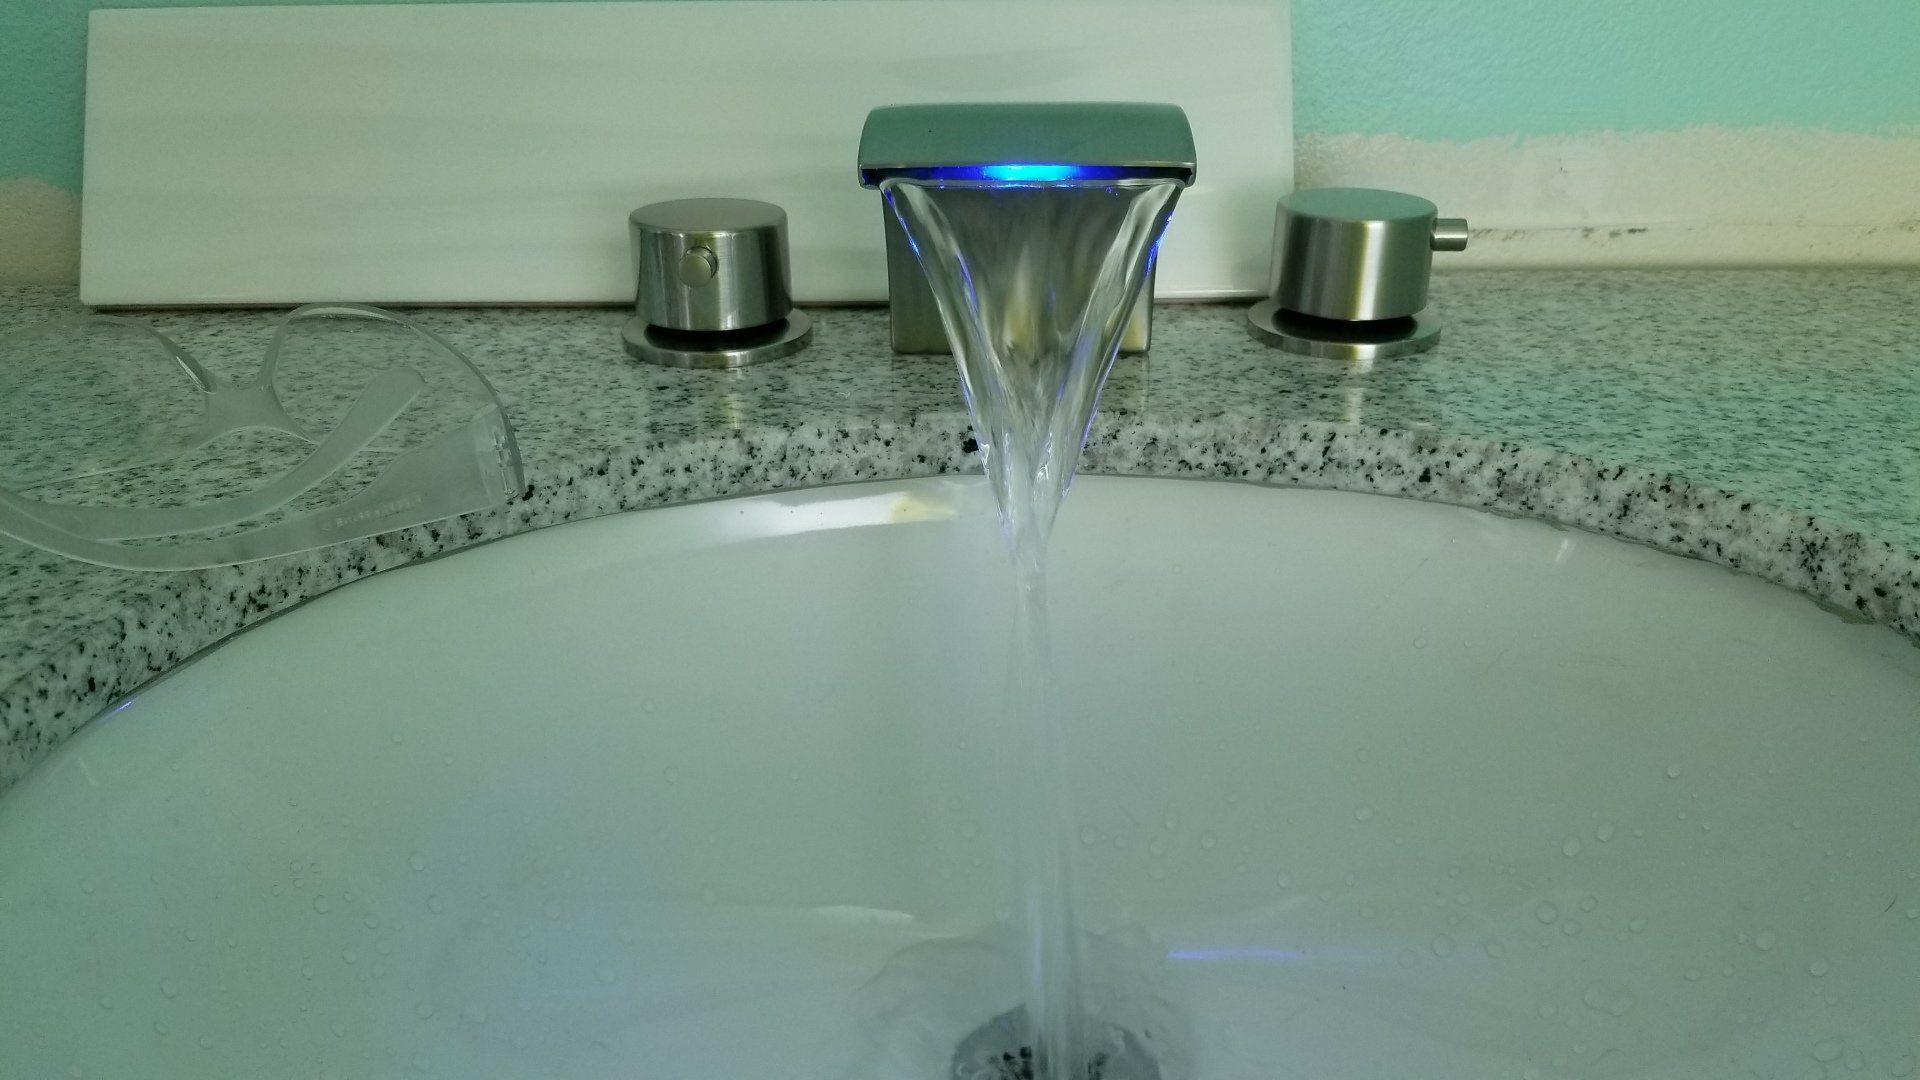 Coral Rock Plumbing in Melbourne FL can install any fancy faucet you can find for your bathroom remodel or kitchen remodel.